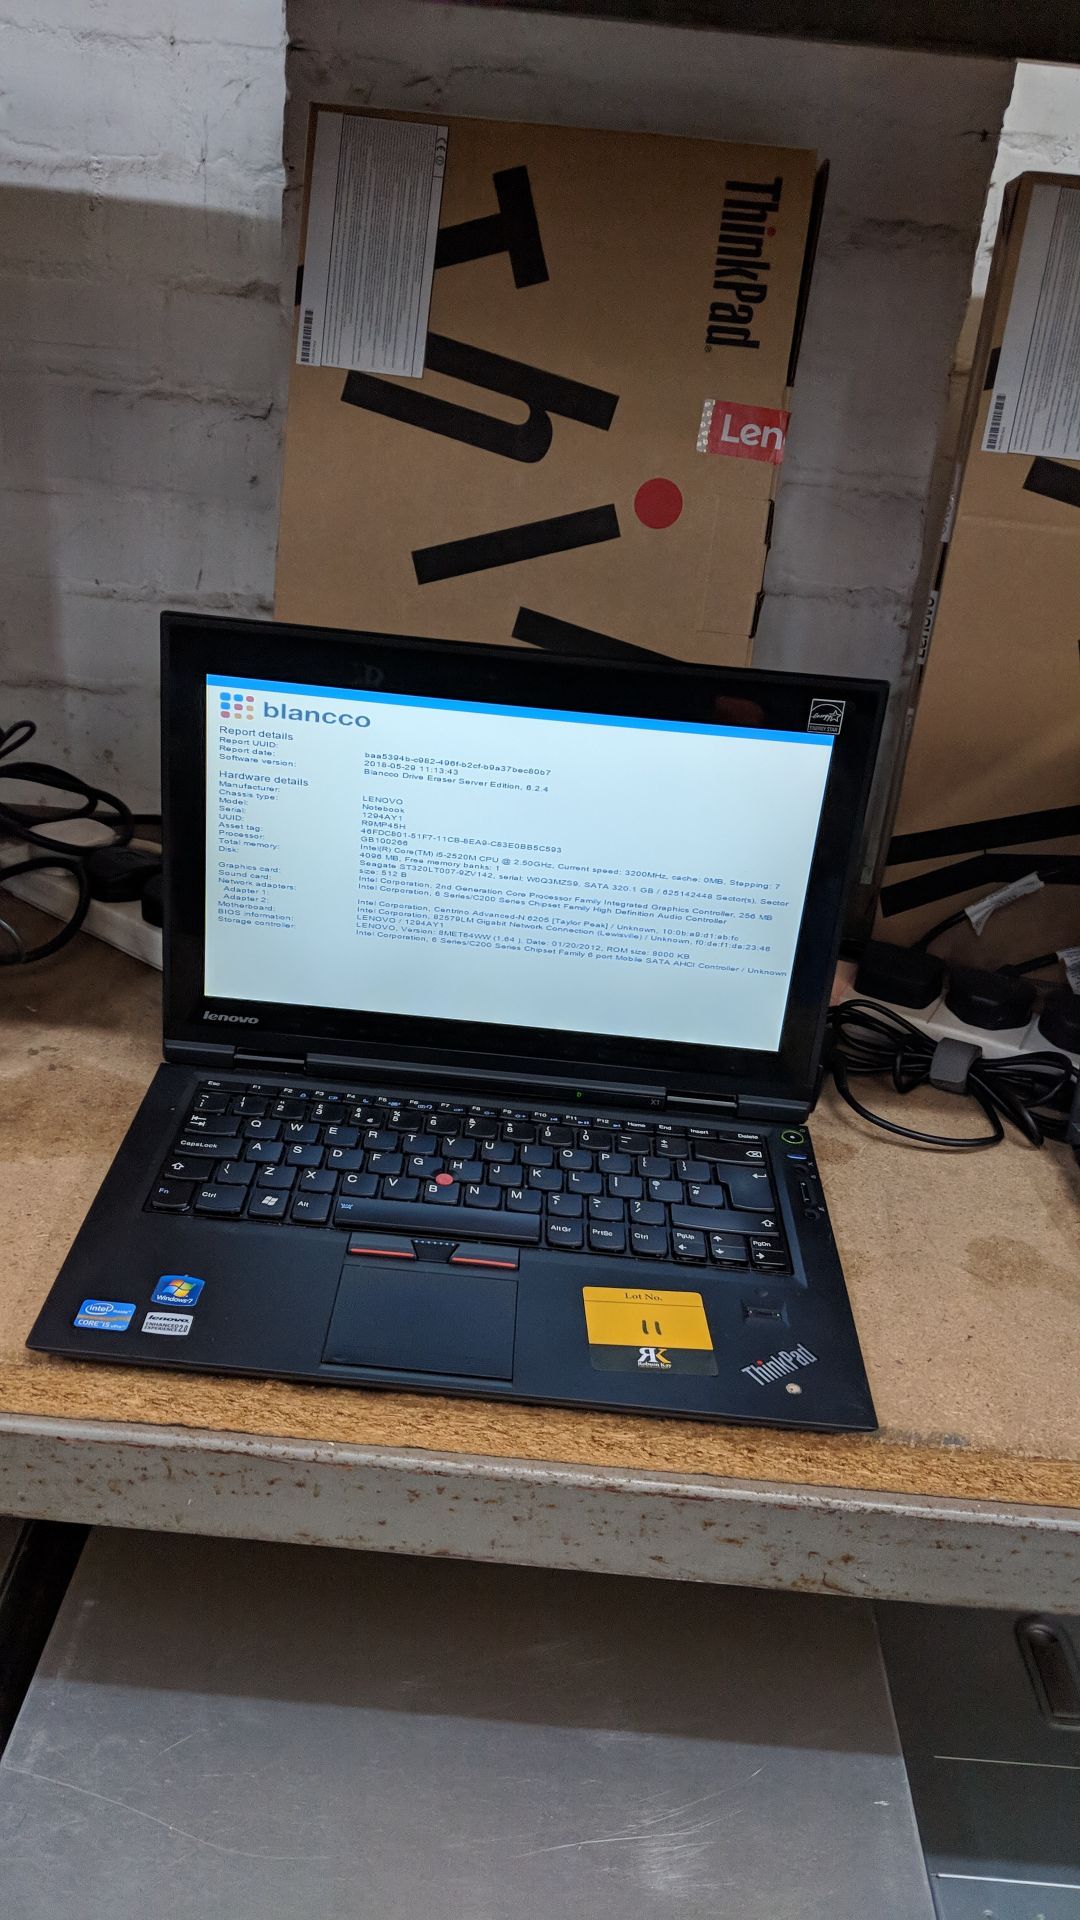 Lenovo ThinkPad X1 notebook computer, model 1294AY1 with built-in webcam. Intel Core i5-2520M CPU@ - Image 6 of 7